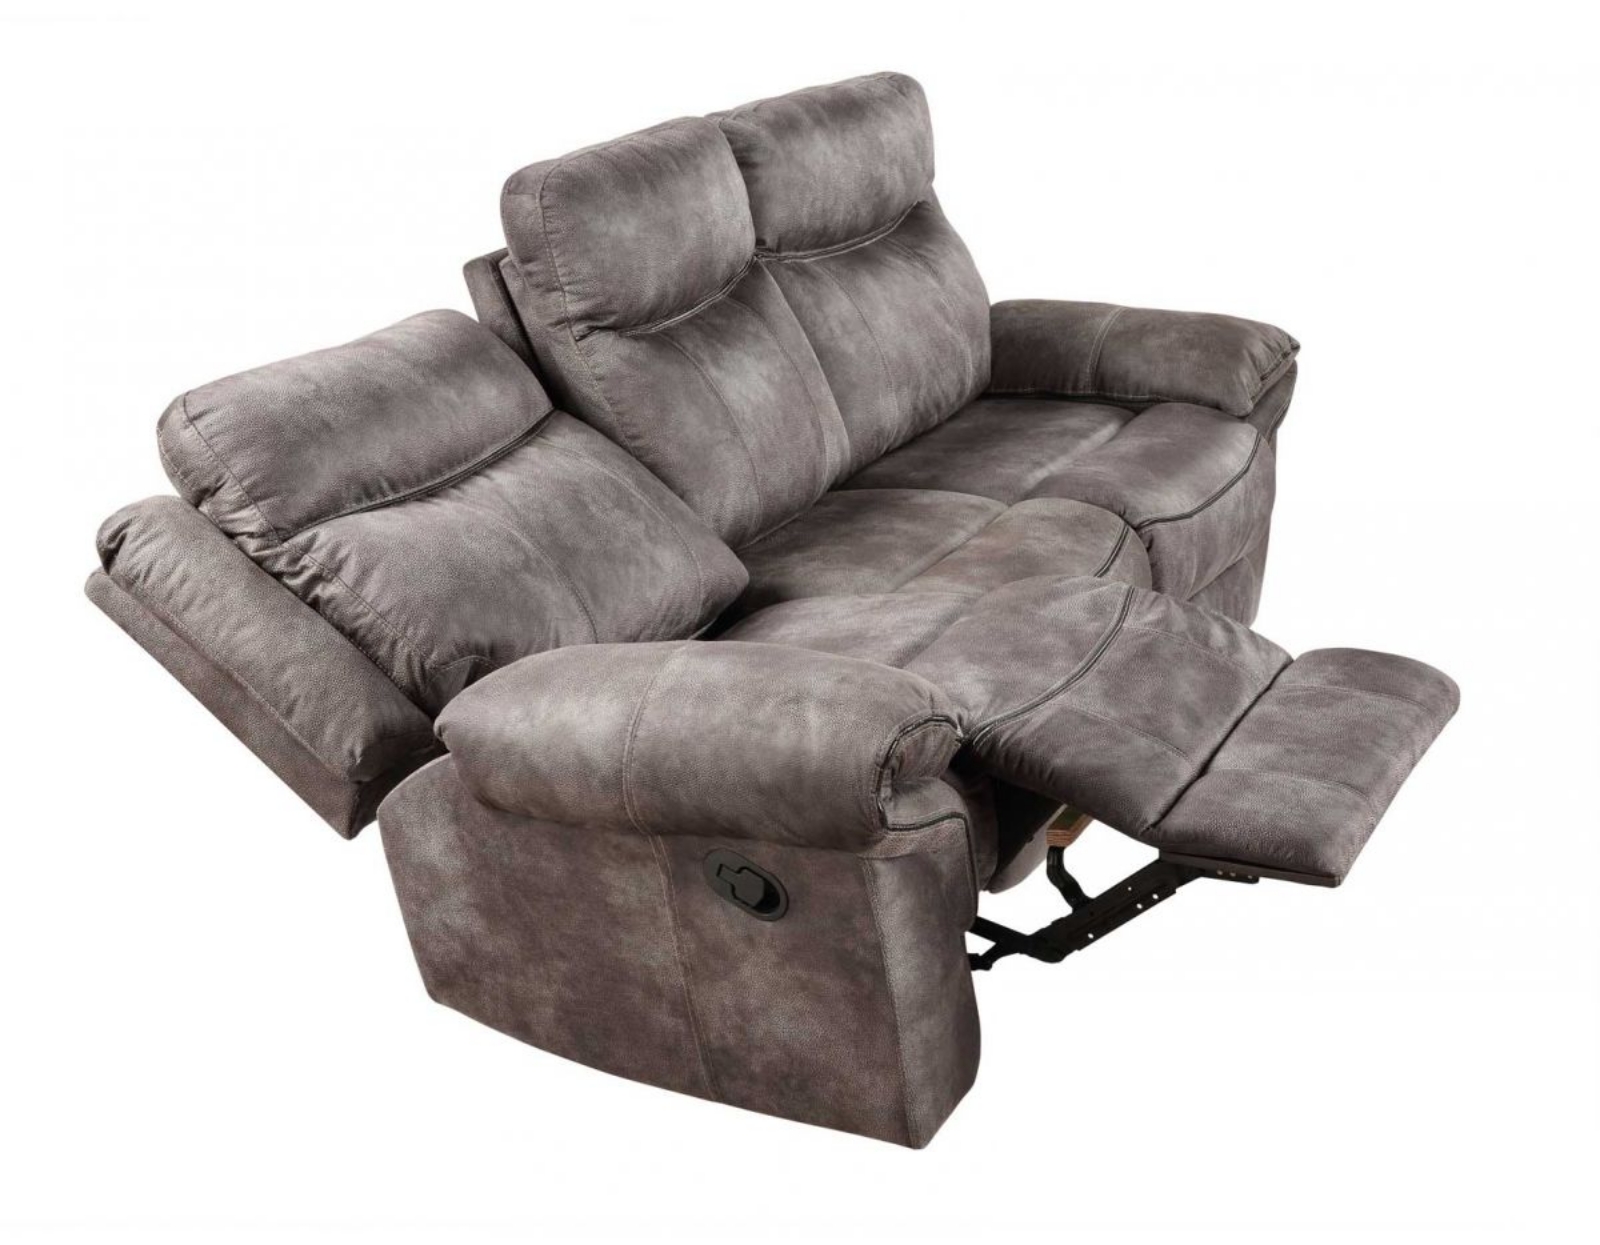 Picture of Nashville Reclining Sofa